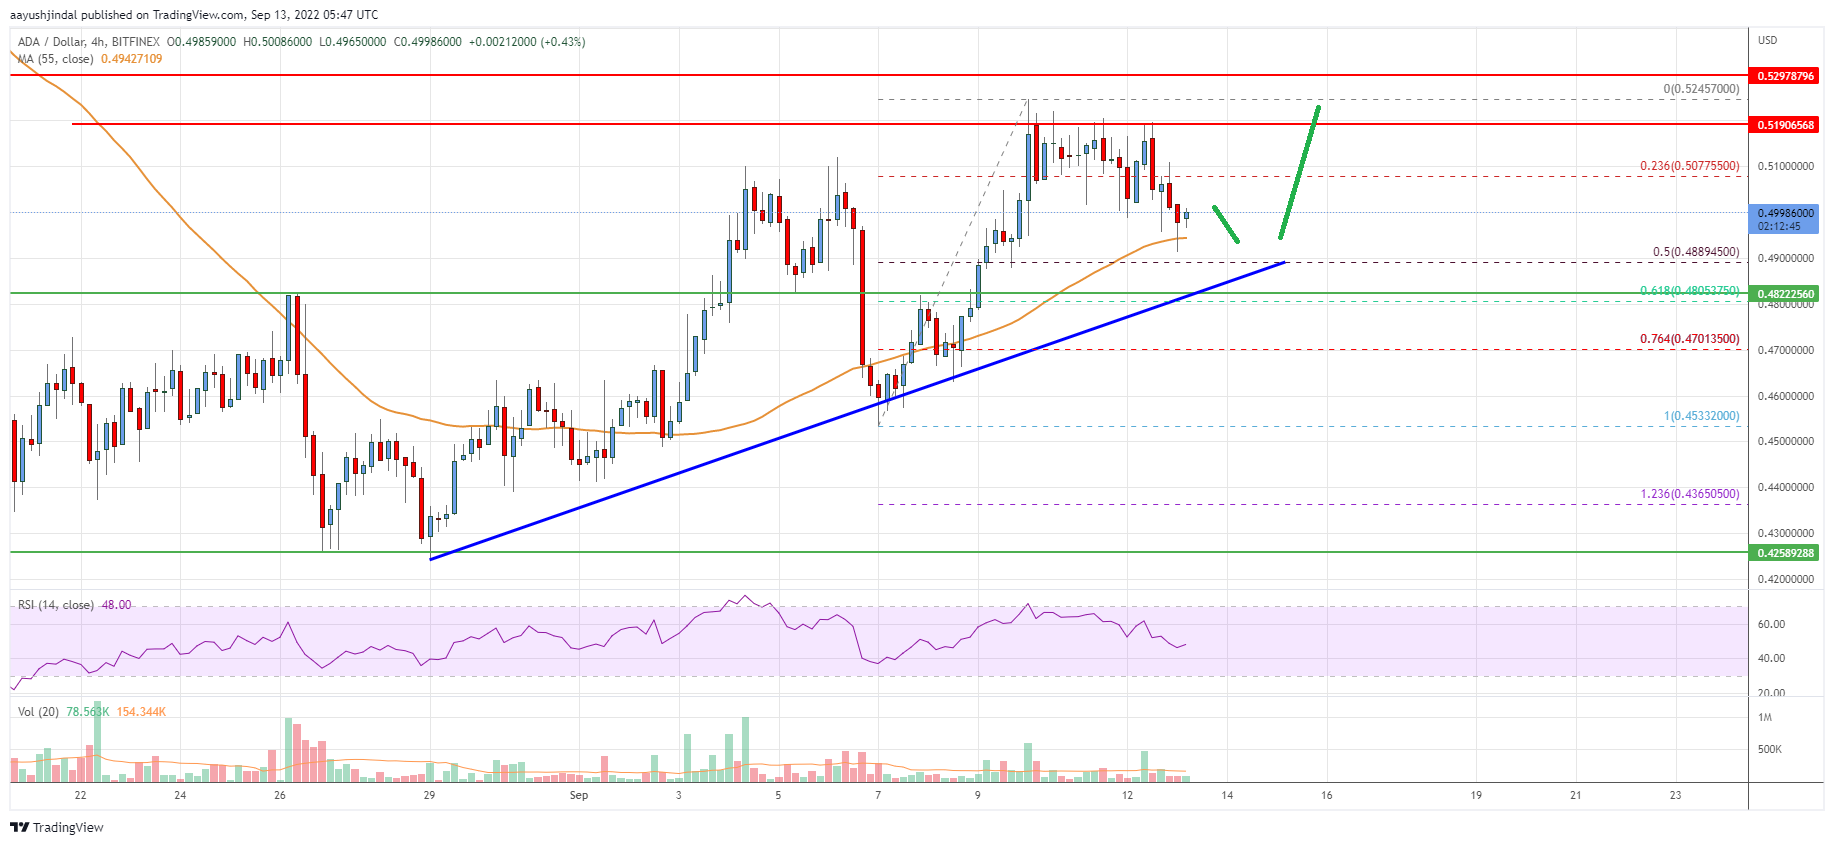 Cardano (ADA) Price Analysis: More Upsides Likely Above $0.52